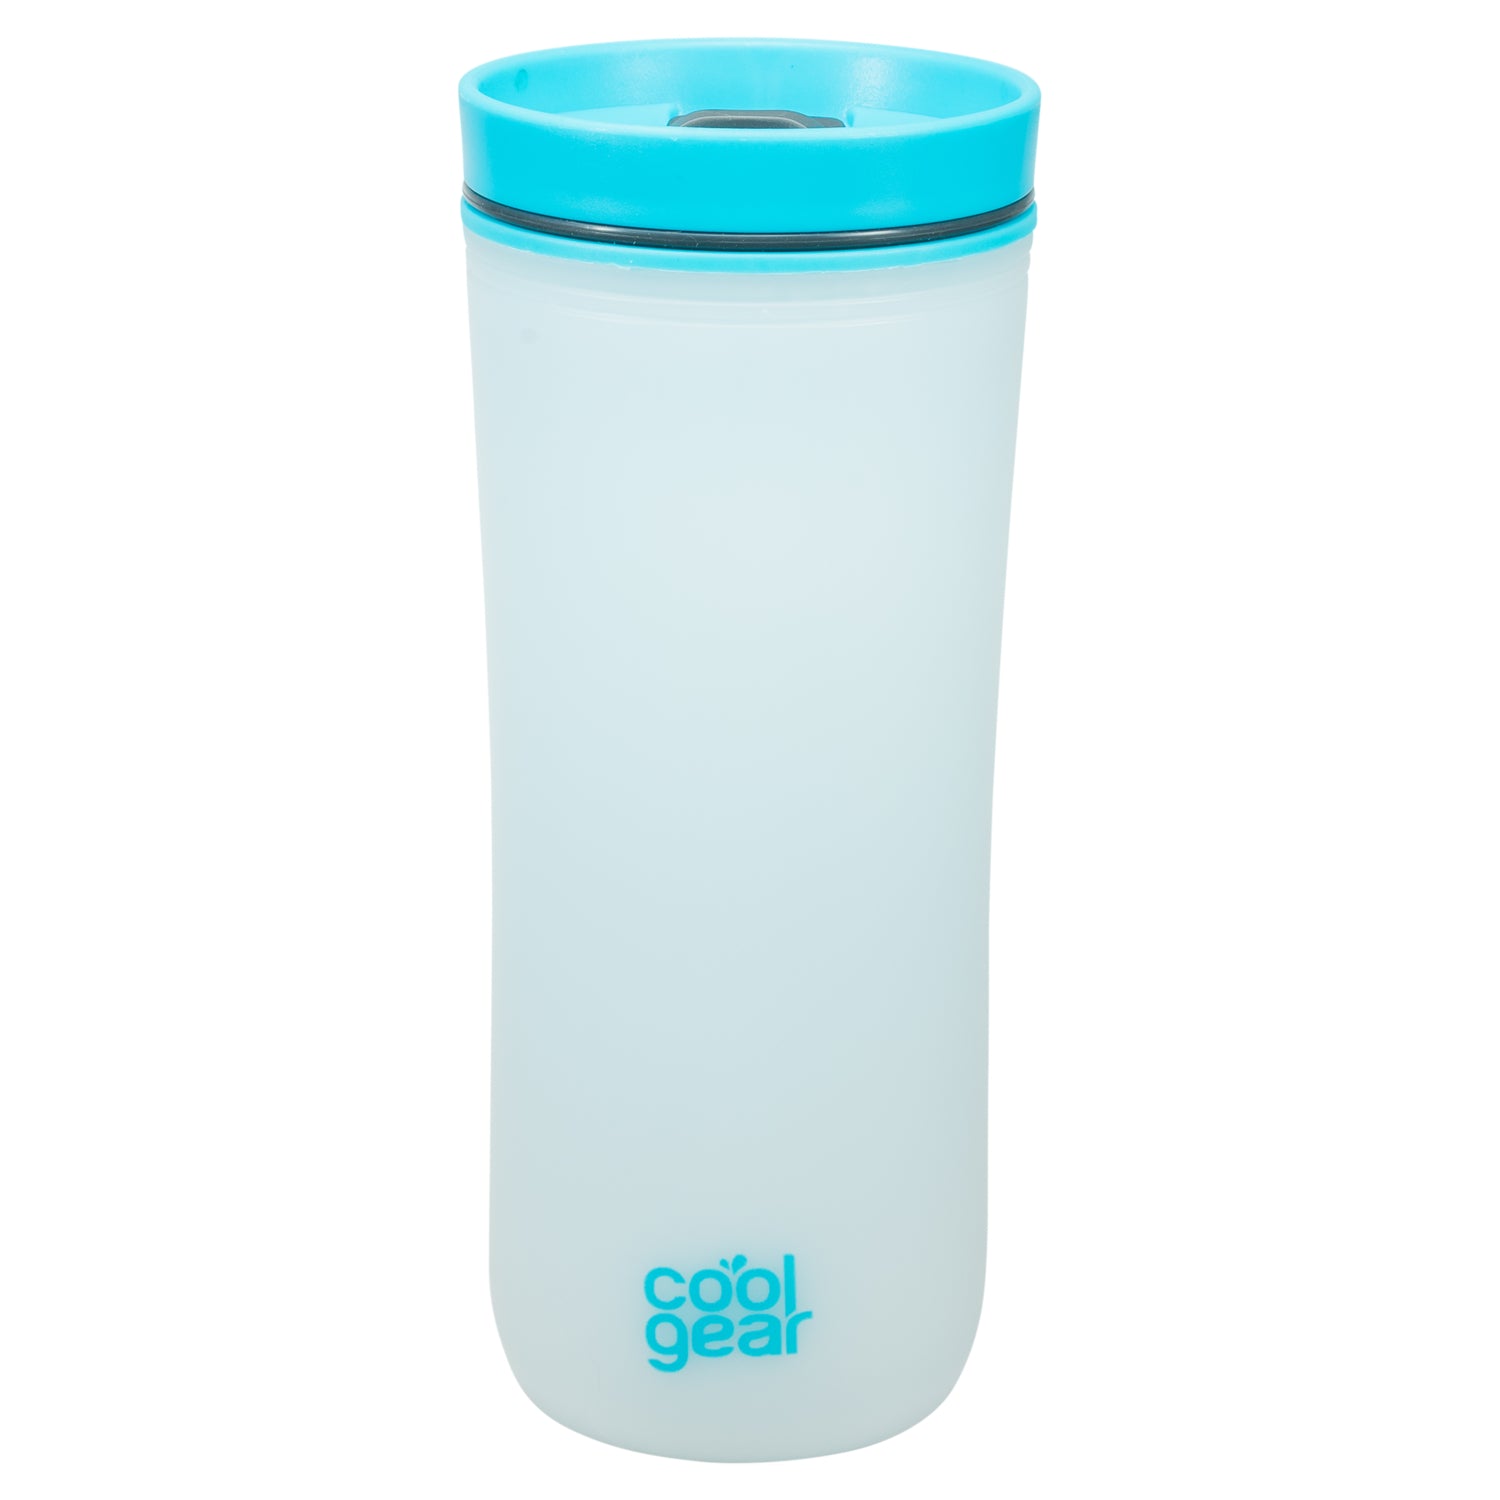 2 Pack COOL GEAR 16 oz Sumatra Coffee Travel Mug with Spill Resistant Slider Lid | Re-Usable Colored Tumbler - image 5 of 12